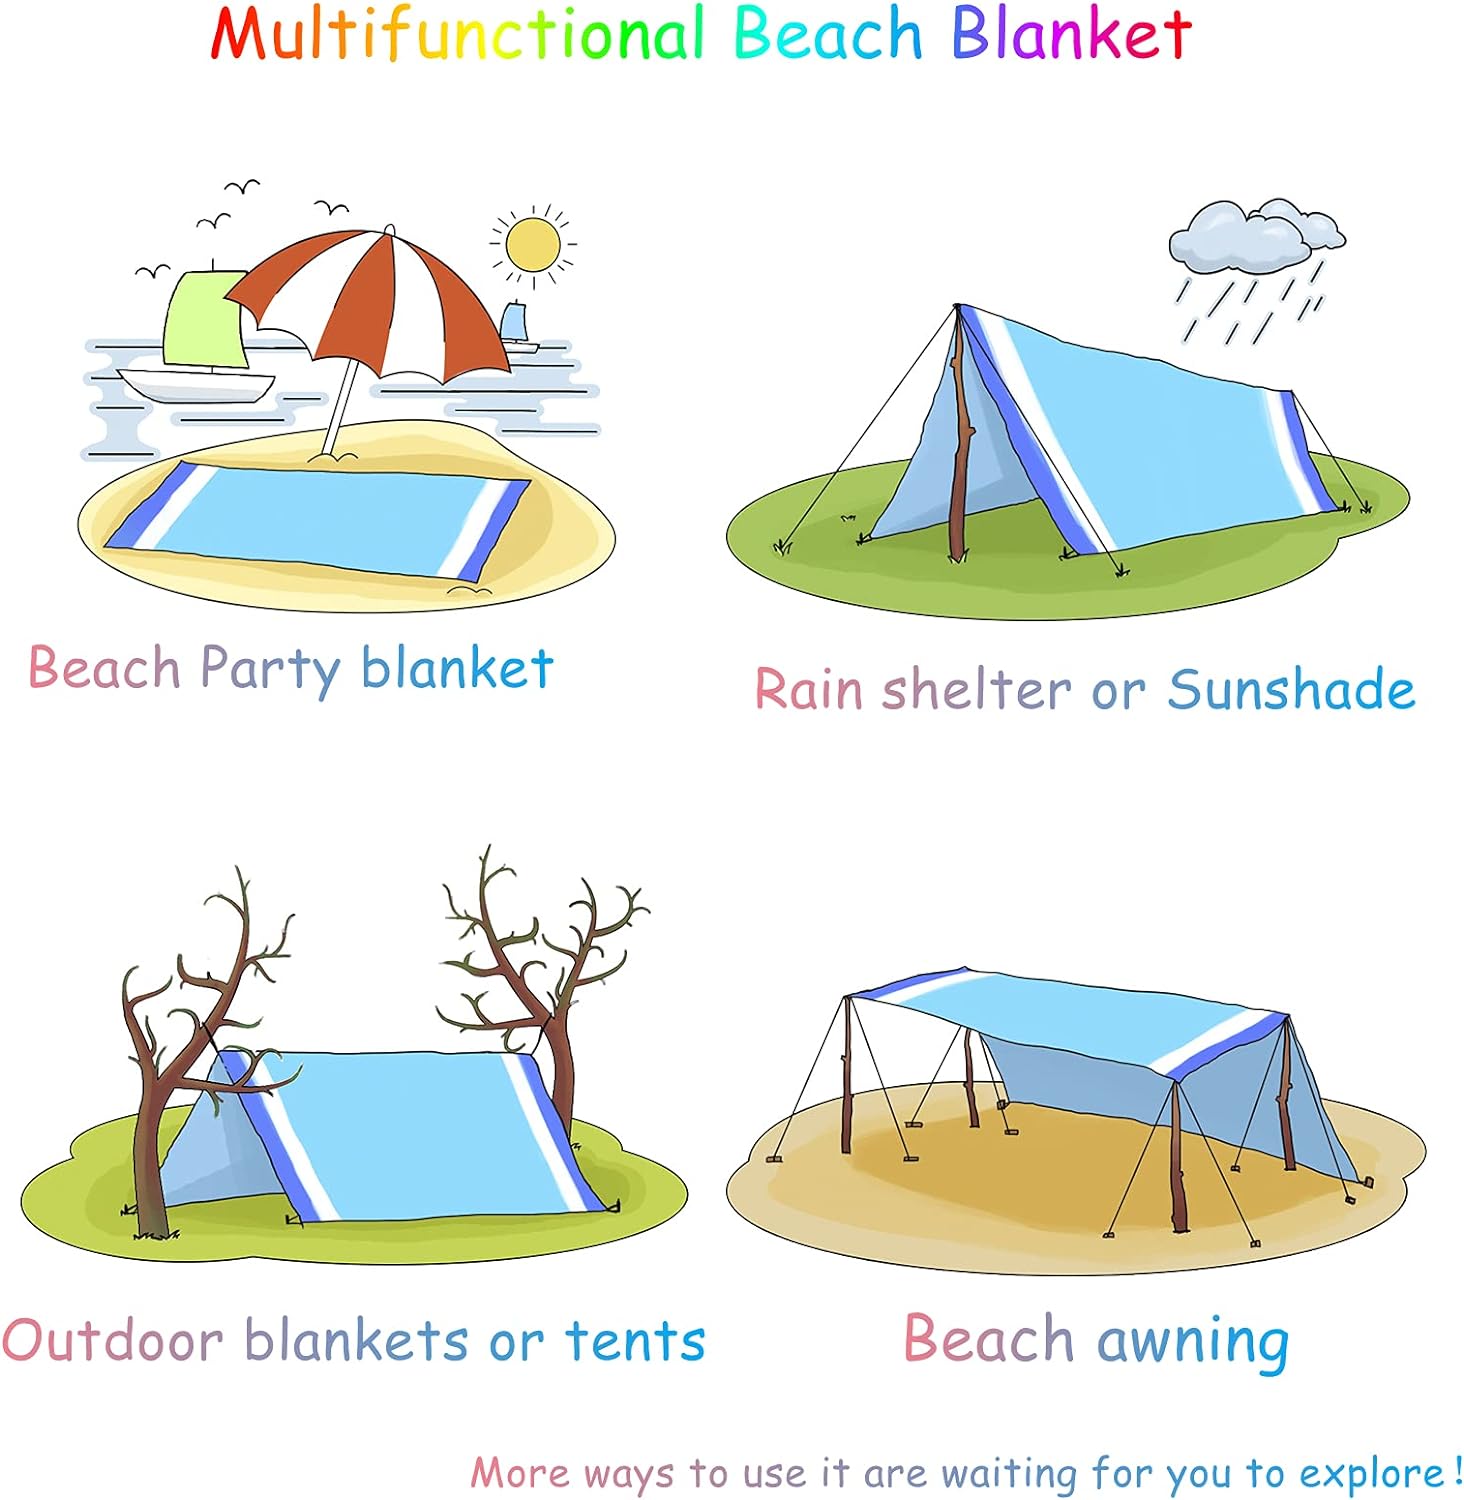 Beach Blanket 78''×81'' 4-7 Adults Oversized Lightweight Waterproof Sandproof Large Picnic Mat for Travel Camping Hiking Picnic(78" X 81", Blue-Mixed)